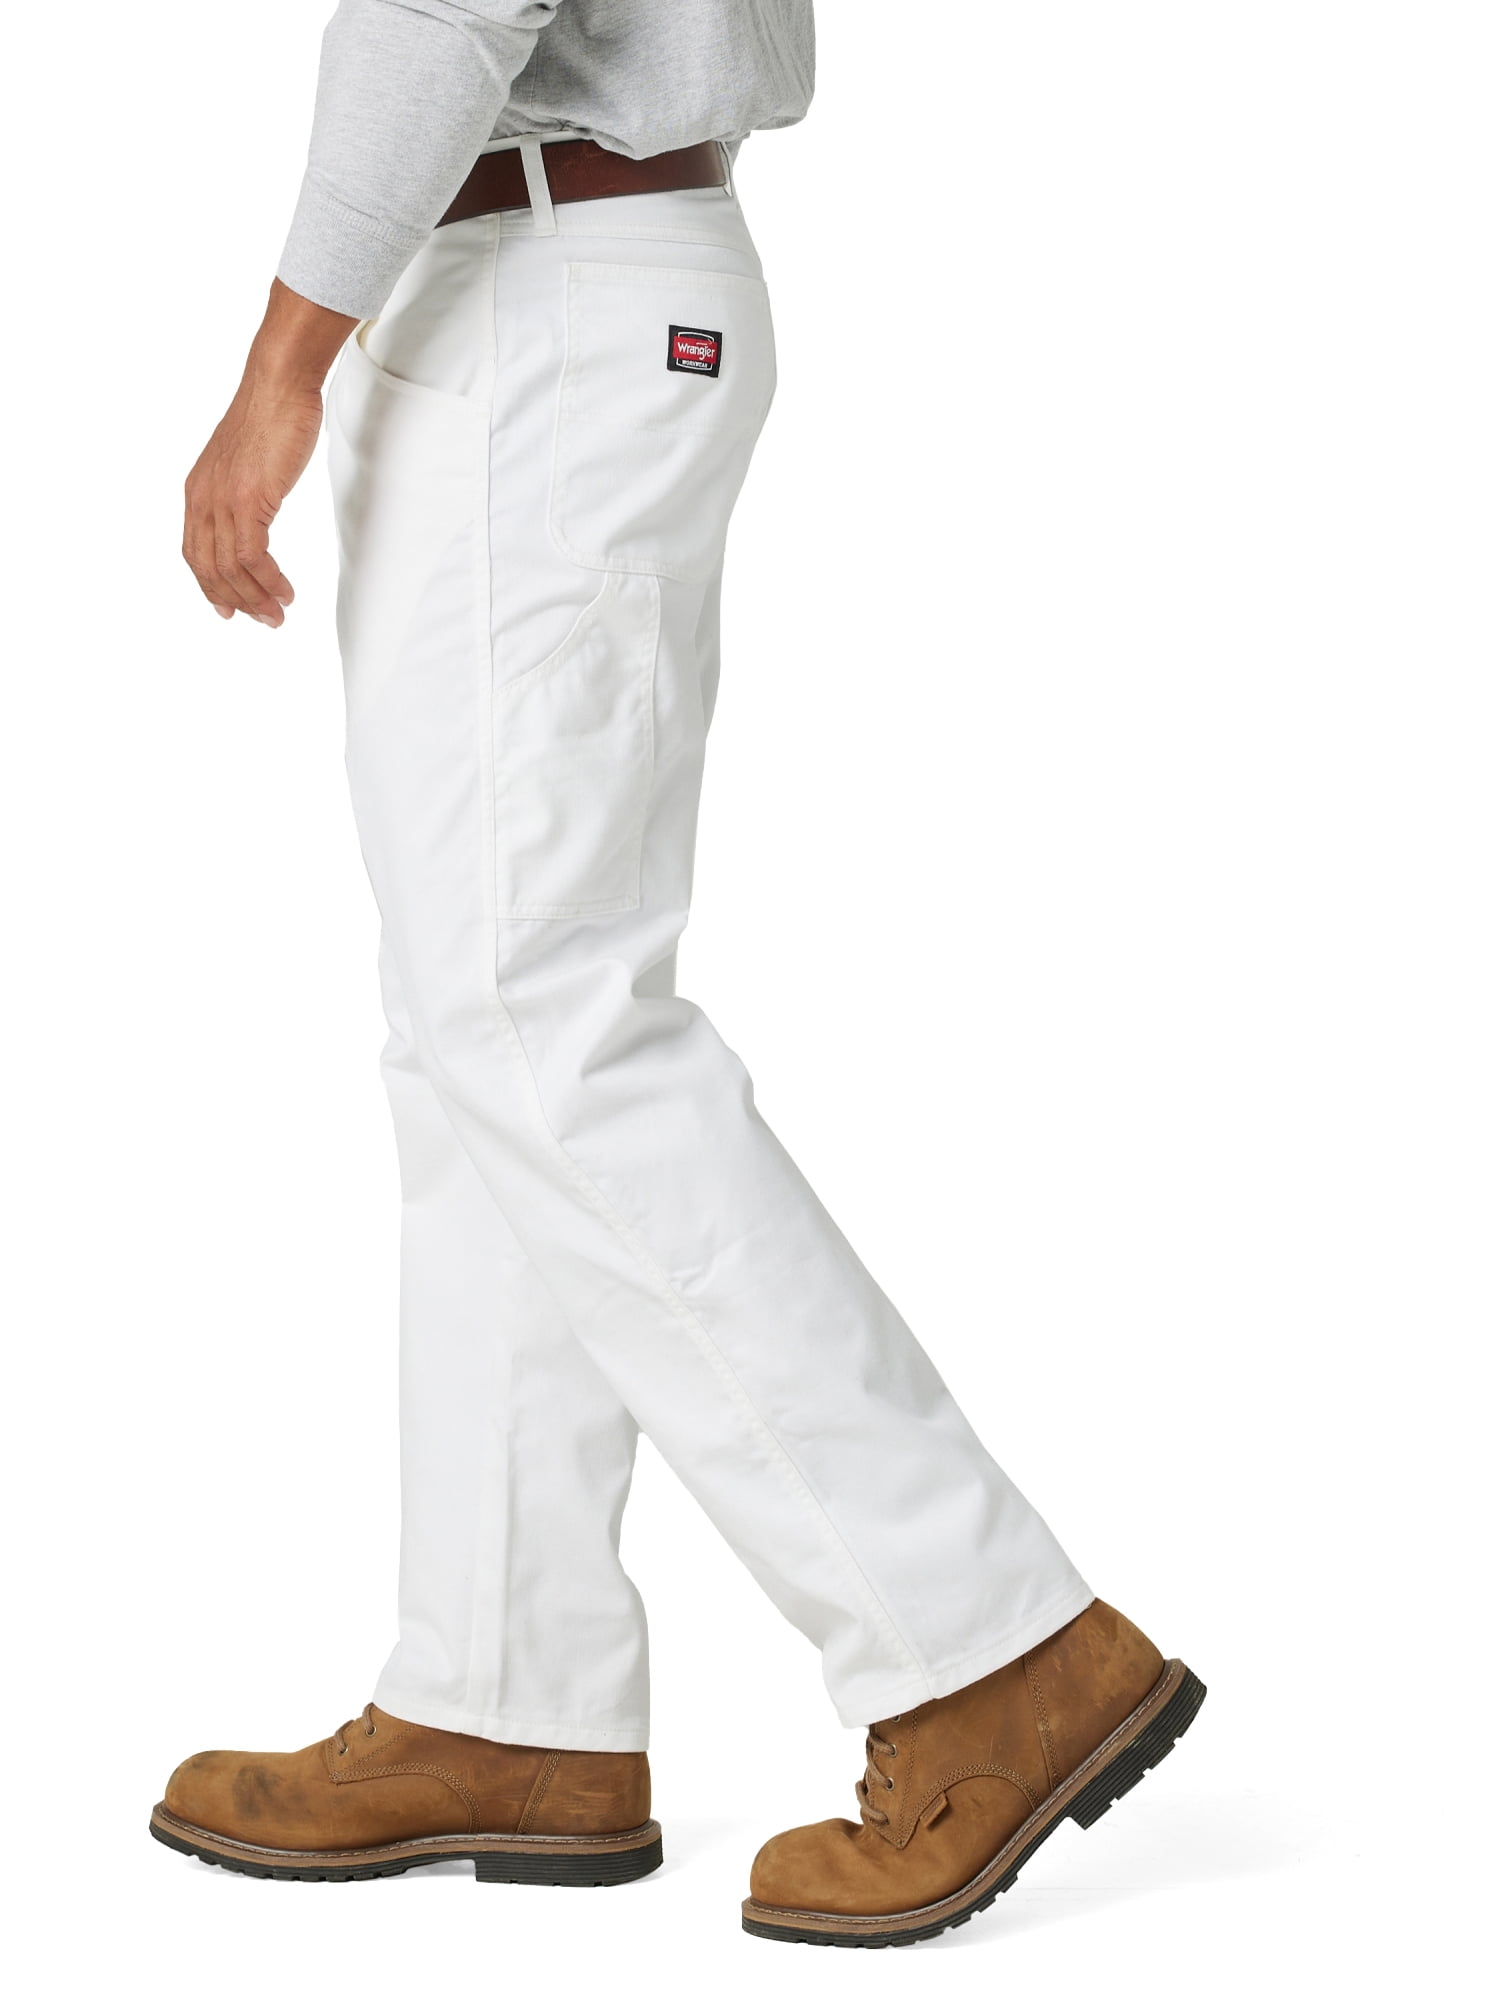 Wholesale High Quality Men S White Painters Work Pants with Utility  Pockets Safety Trousers  China Painters Work Pants and Workwear price   MadeinChinacom